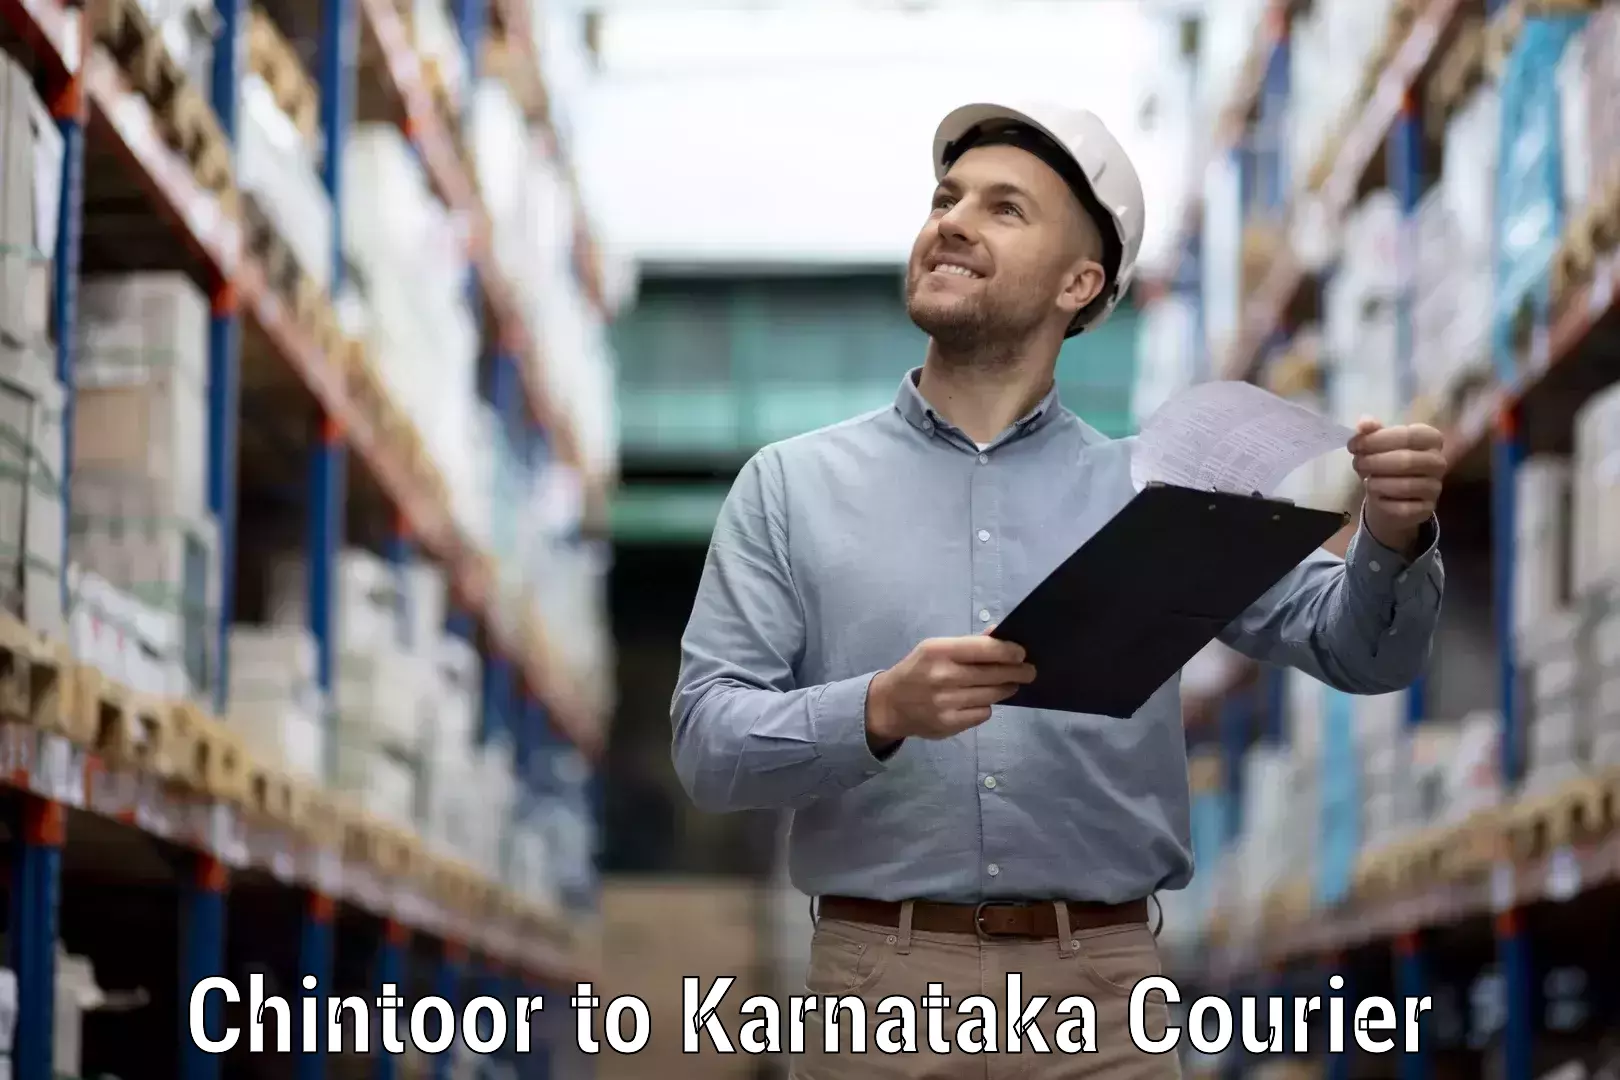 Customer-focused courier Chintoor to Rona Gadag